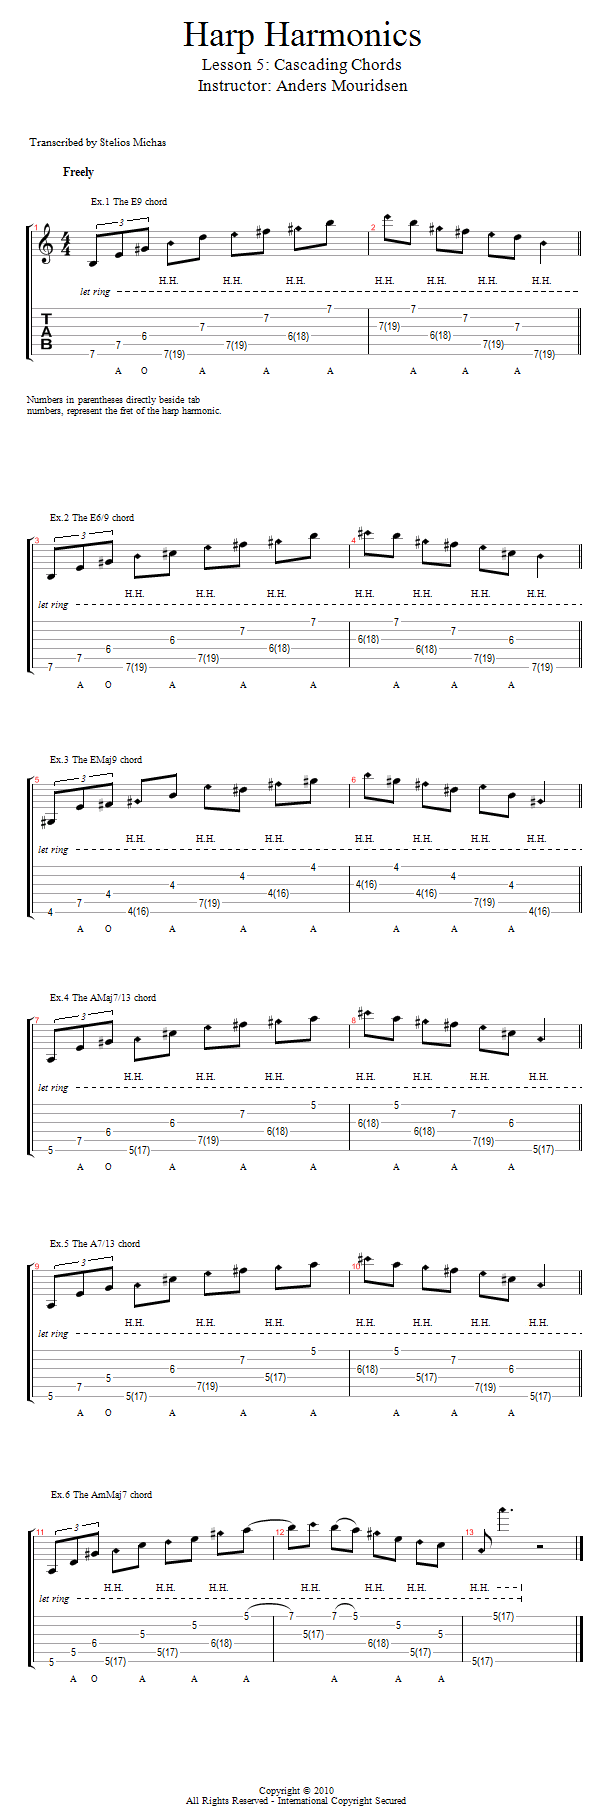 Cascading Chords song notation